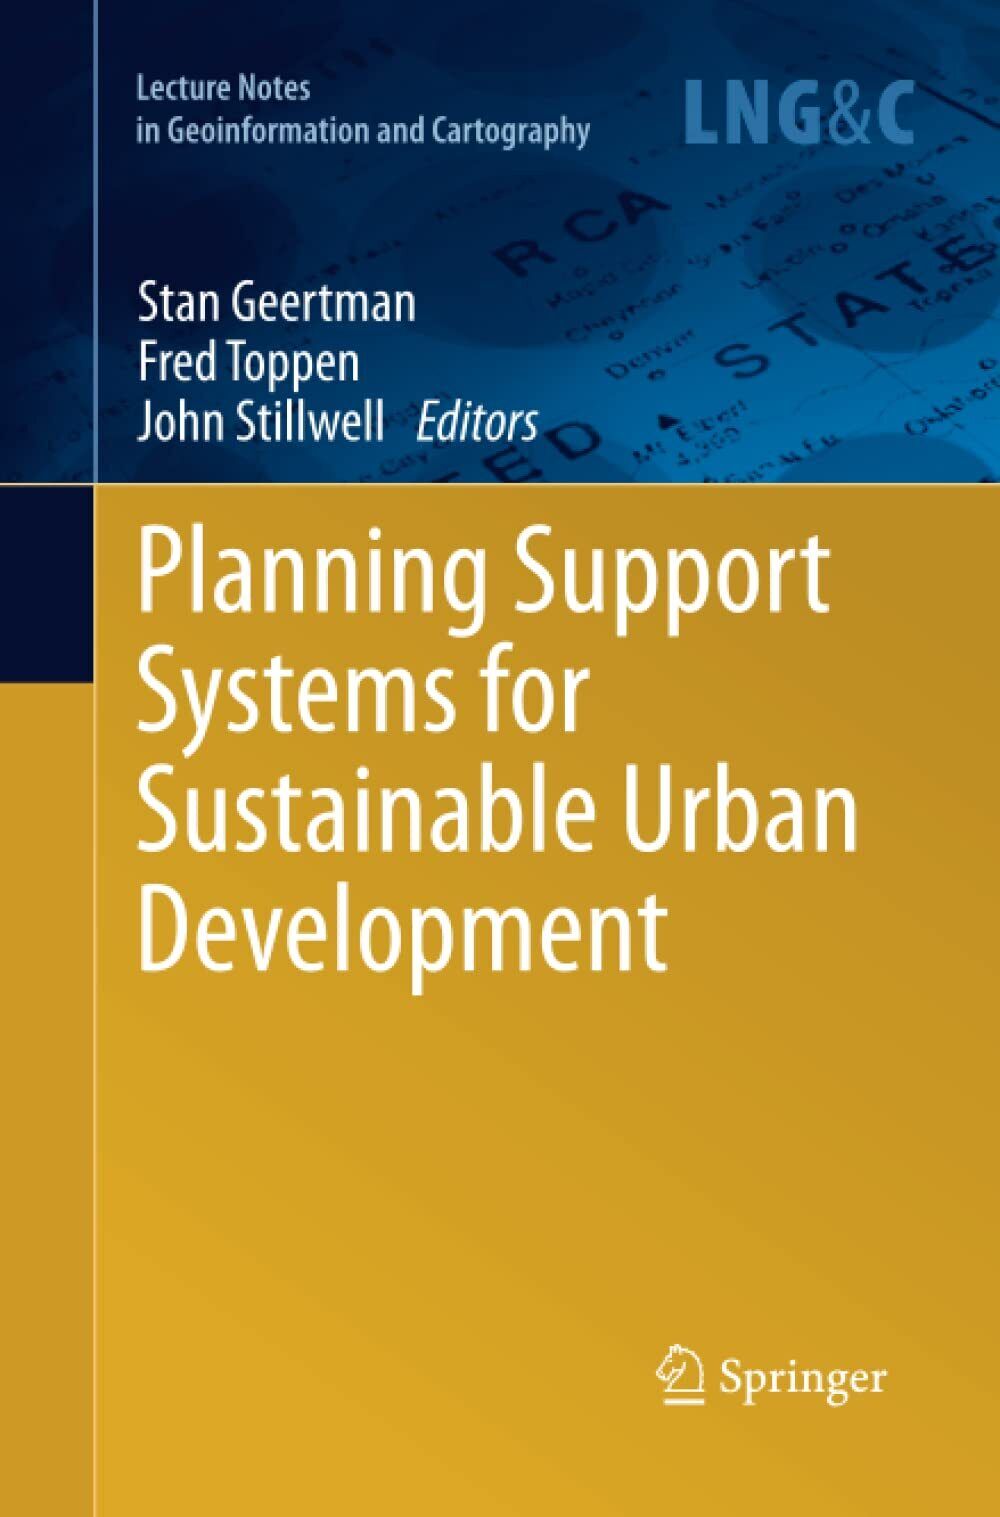 Planning Support Systems for Sustainable Urban Development - Springer, 2014 libro usato